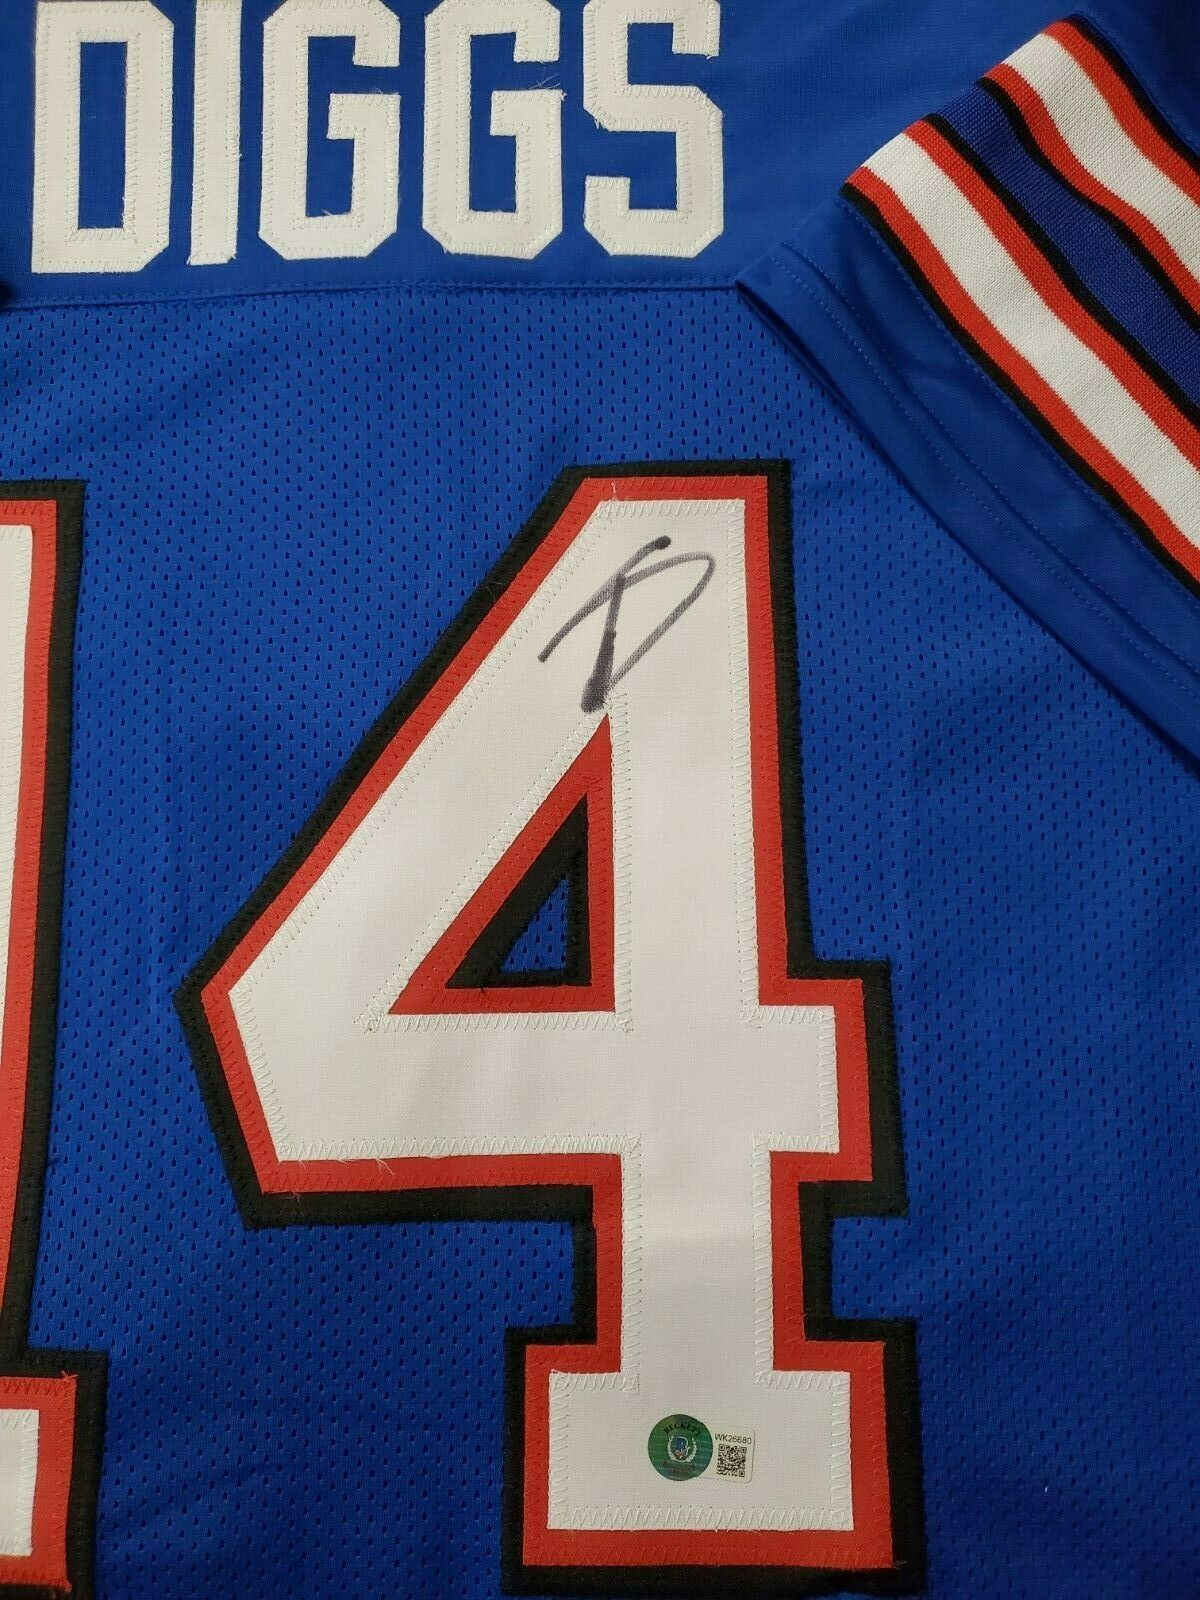 stefon diggs signed jersey